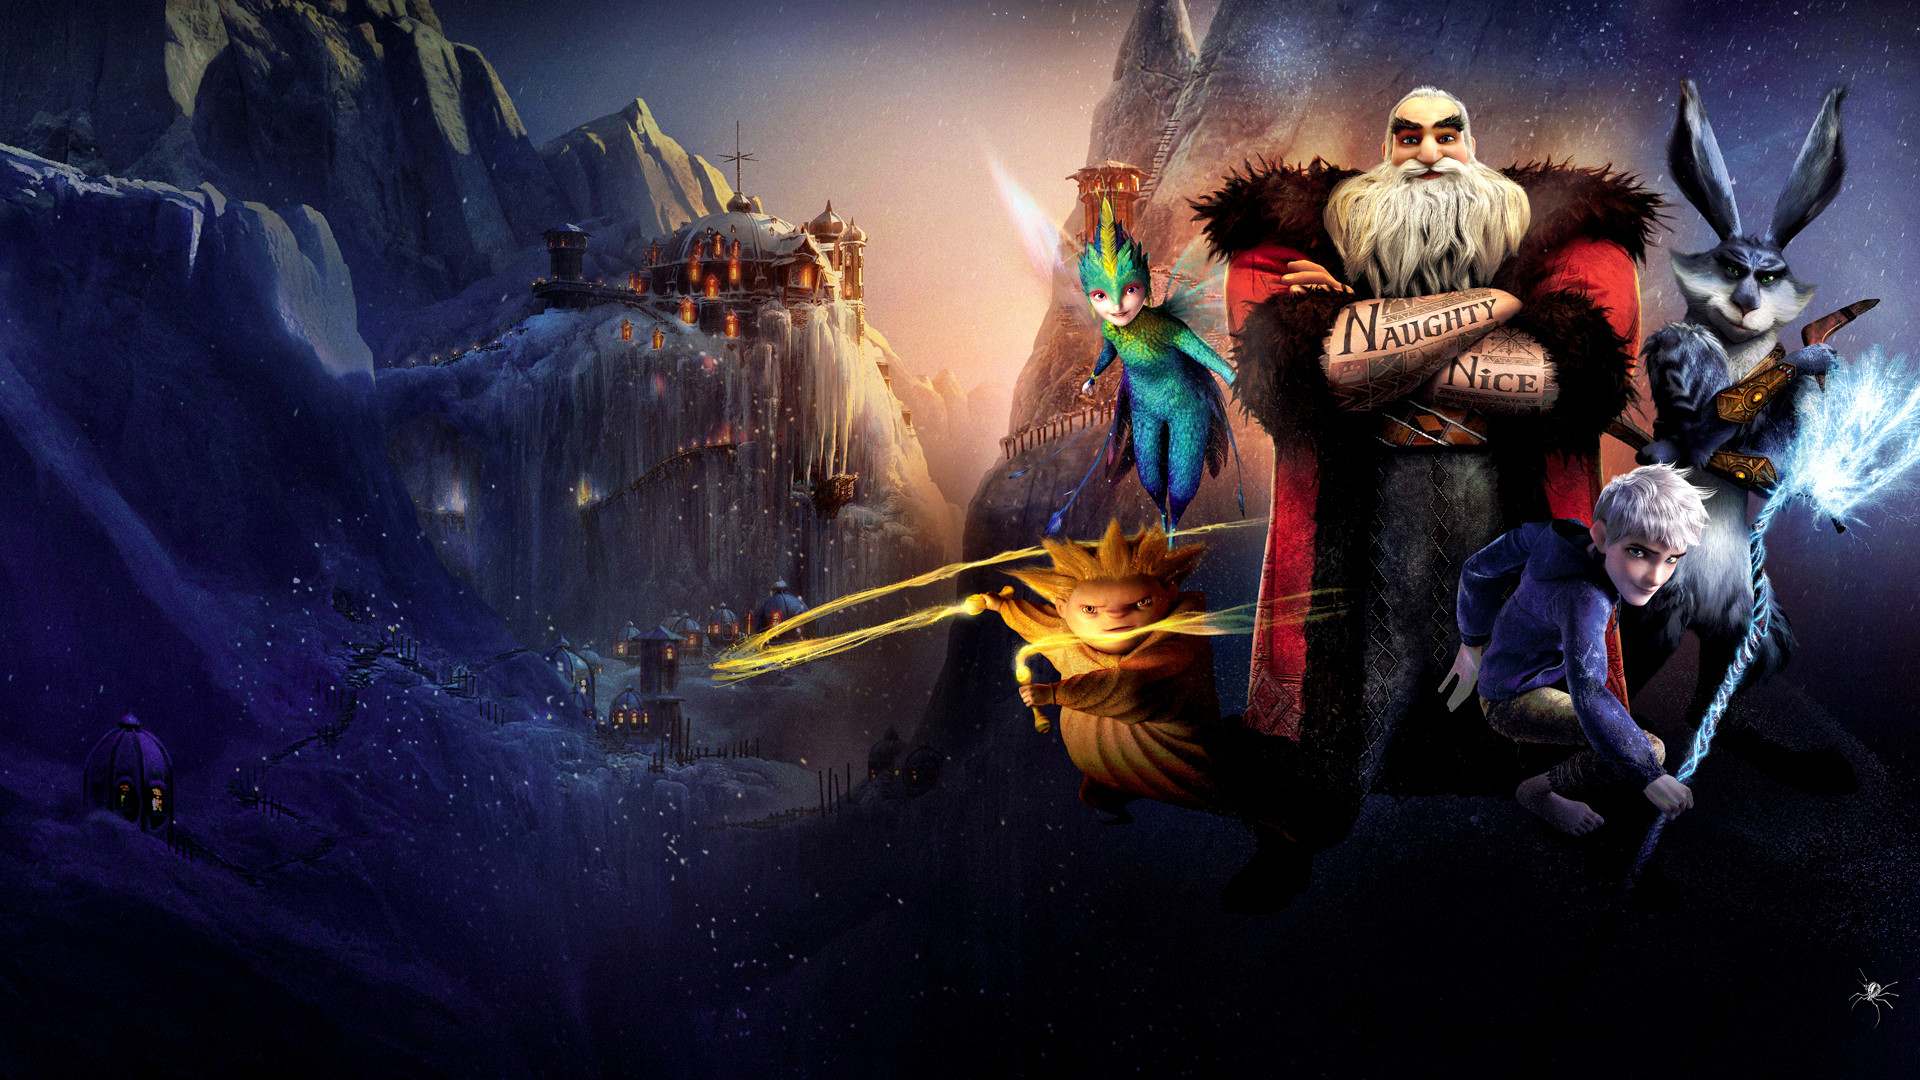 Rise Of The Guardians Movie Wallpapers | Sizzlingwallpapers – Part 3